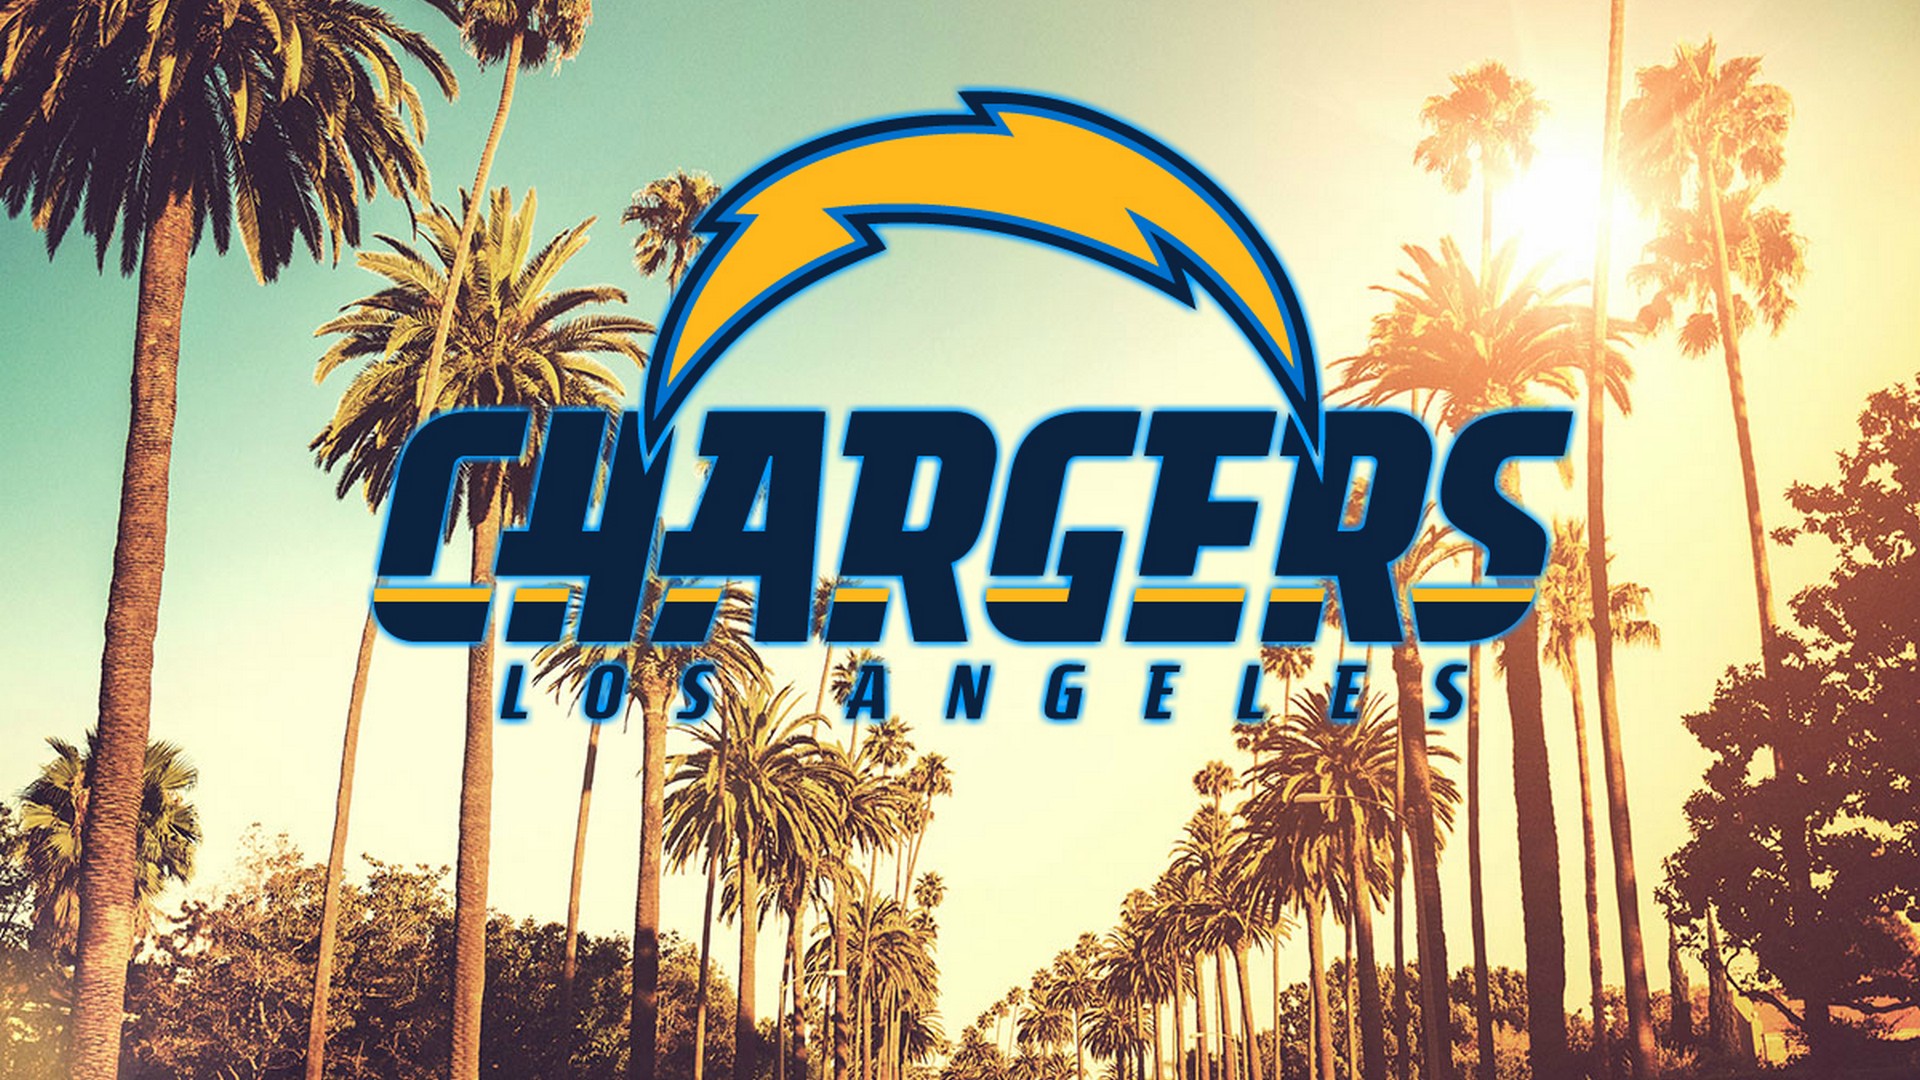 Update 75+ chargers wallpaper 4k - in.cdgdbentre